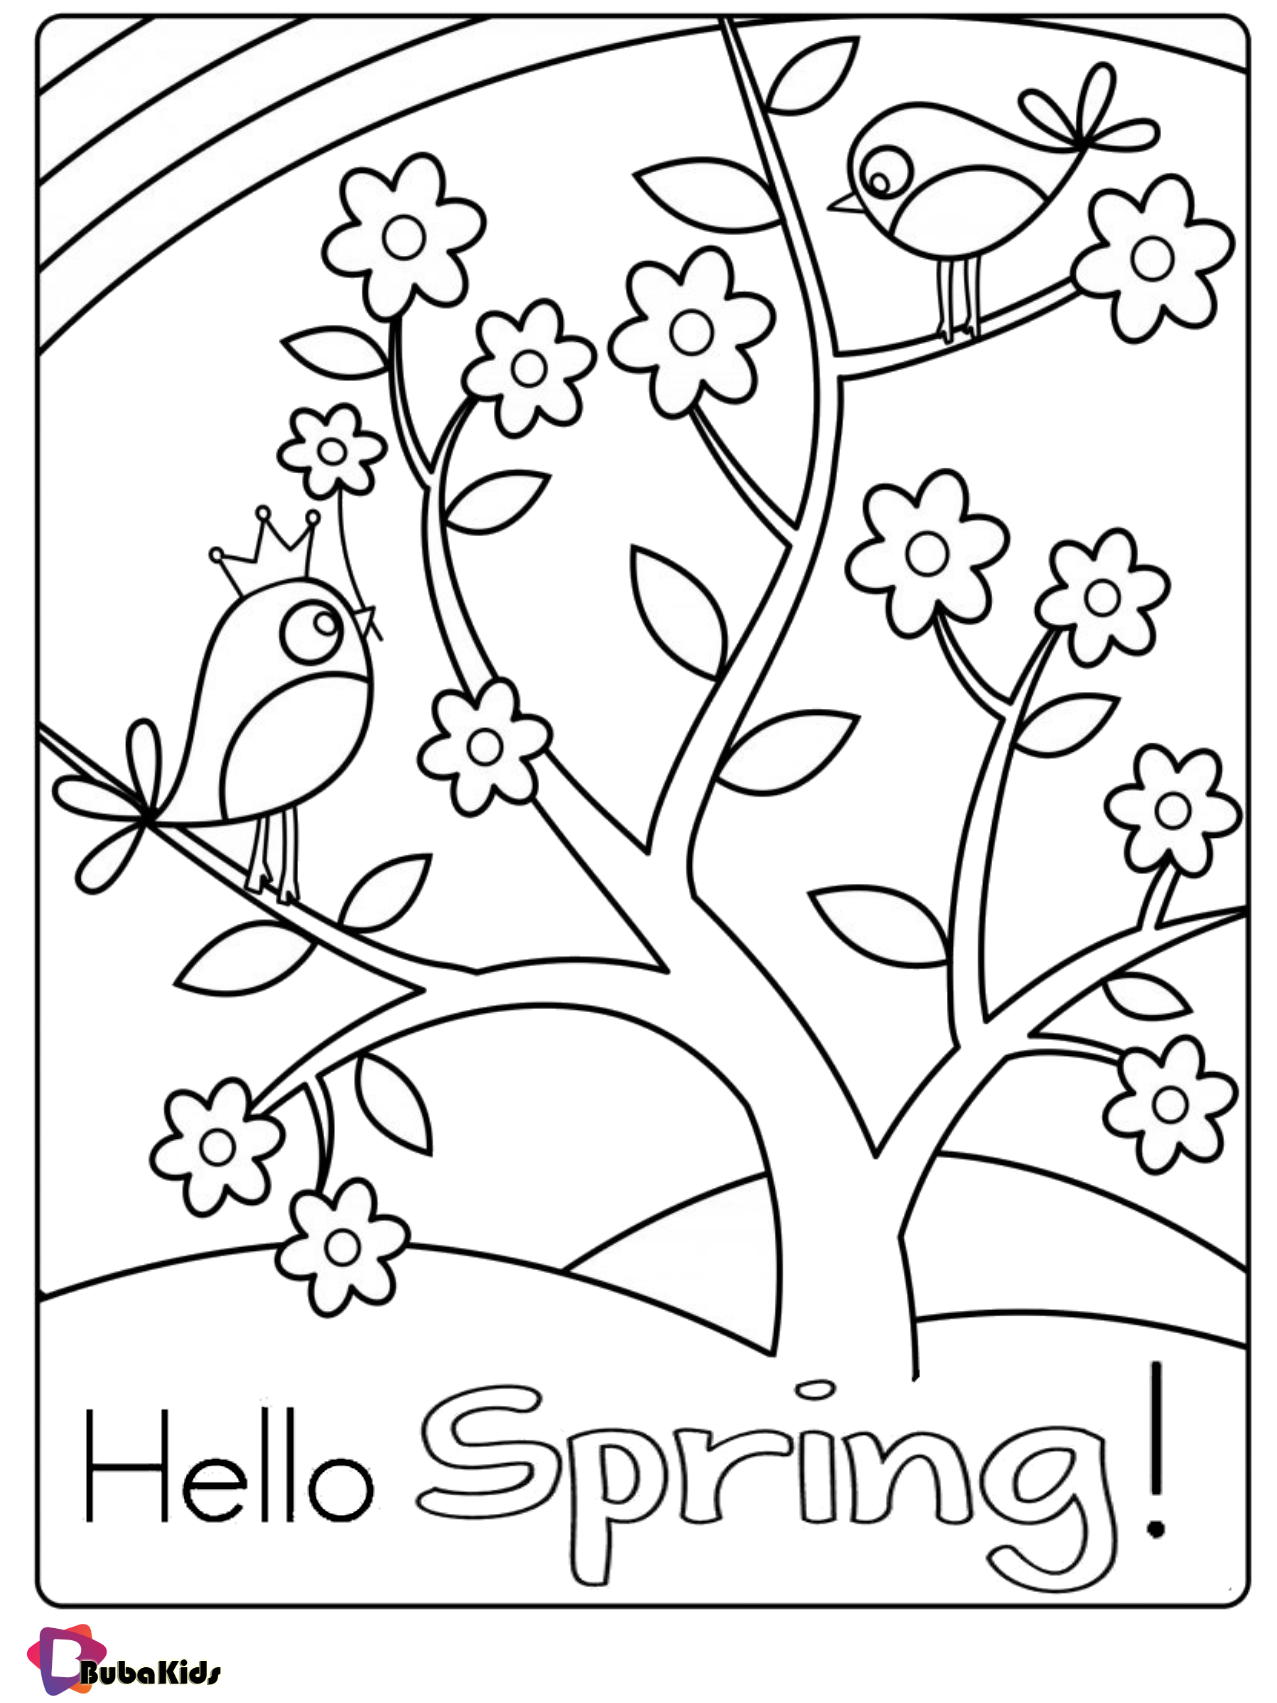 Free download Hello Spring! Coloring page for kids Wallpaper